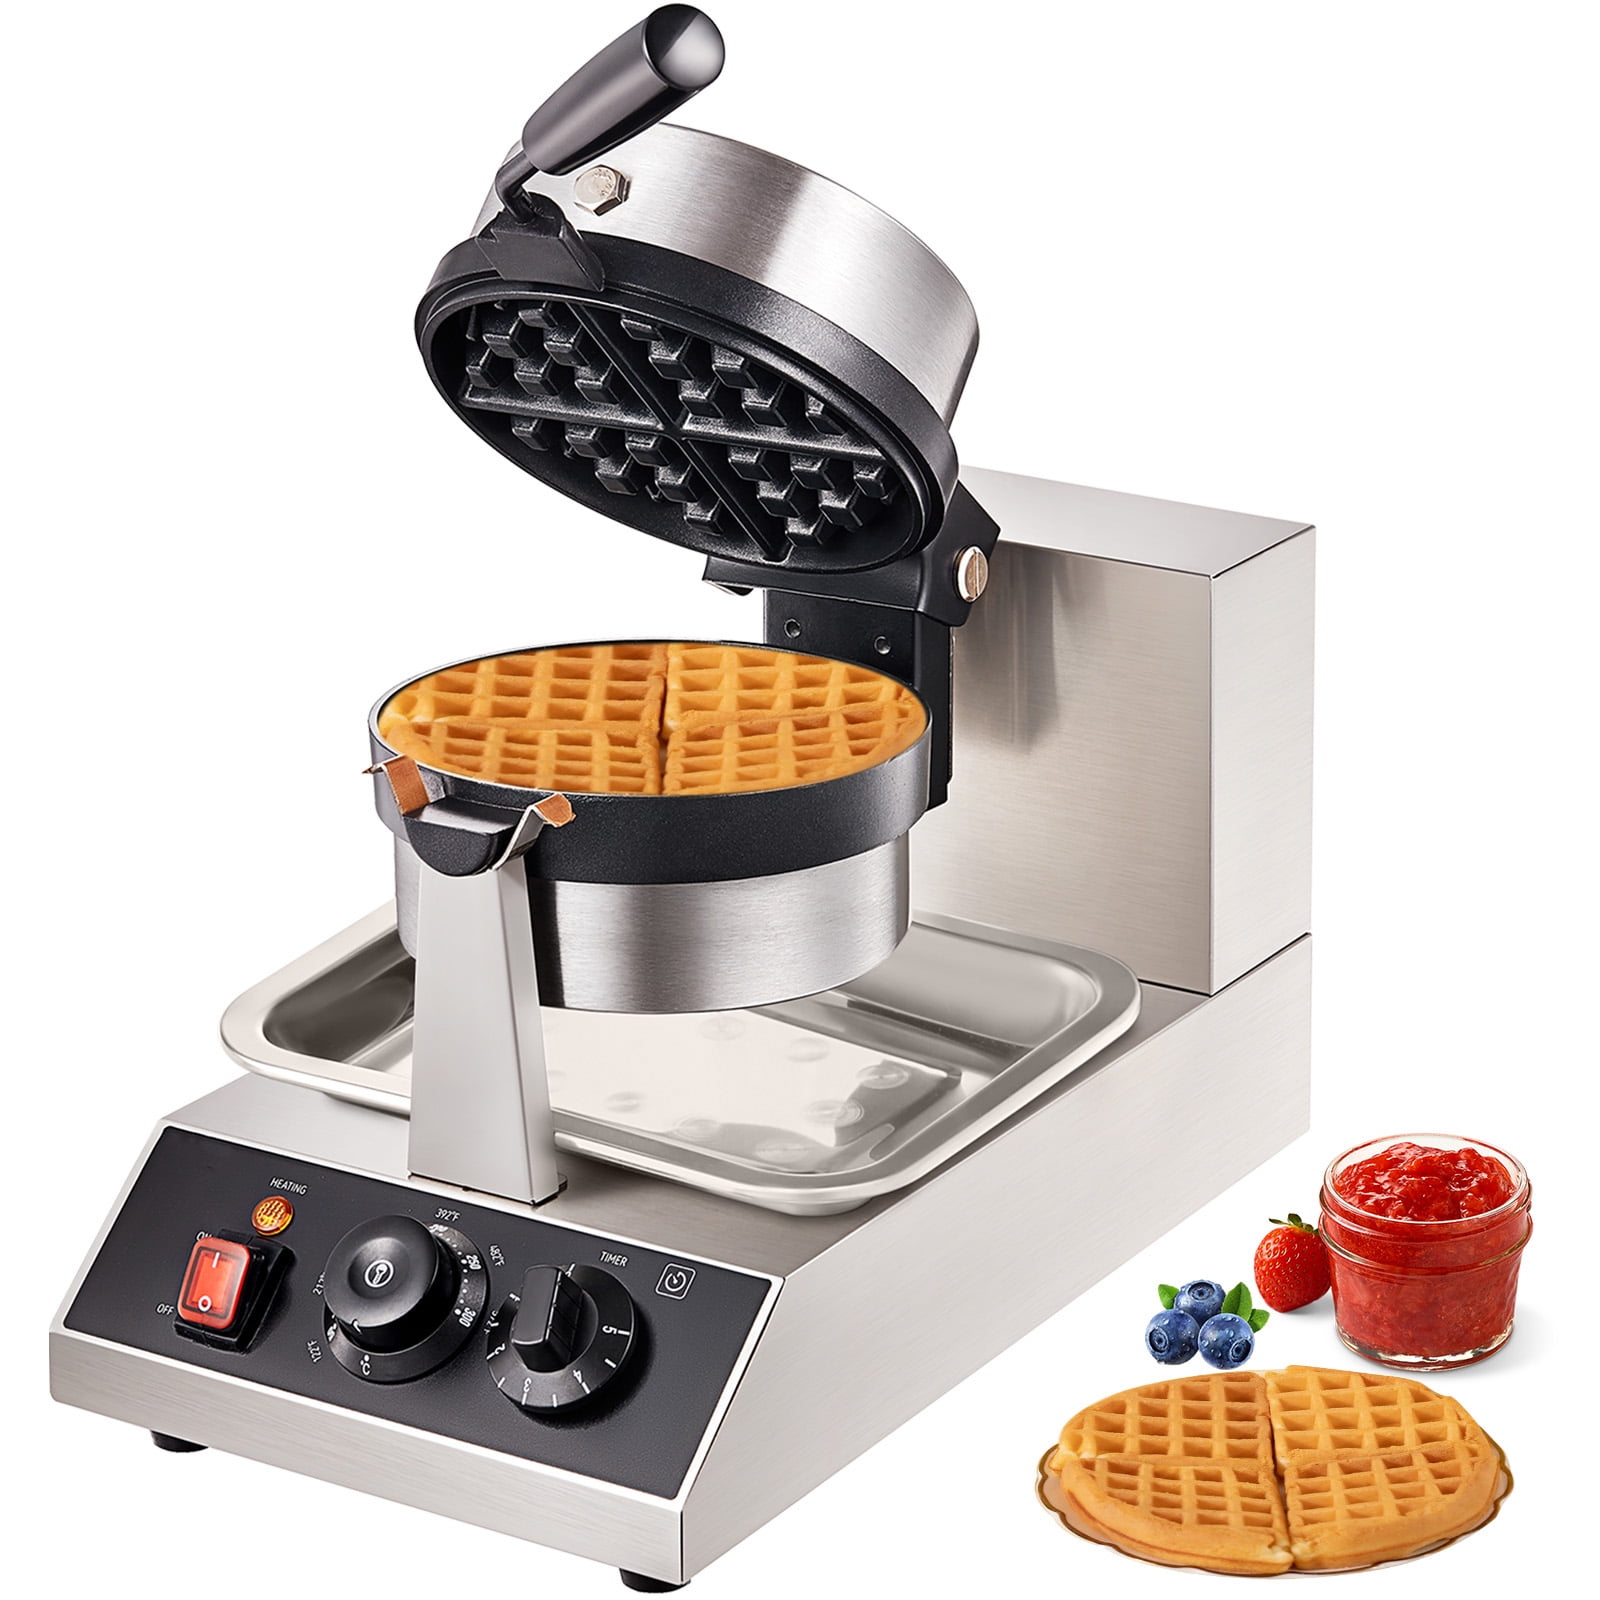 HOLSTEIN HOUSEWARES Everyday 4-Egg White and Stainless Steel 2-section Egg Cooker  Omelet Maker with Non-Stick HH-0937012W - The Home Depot